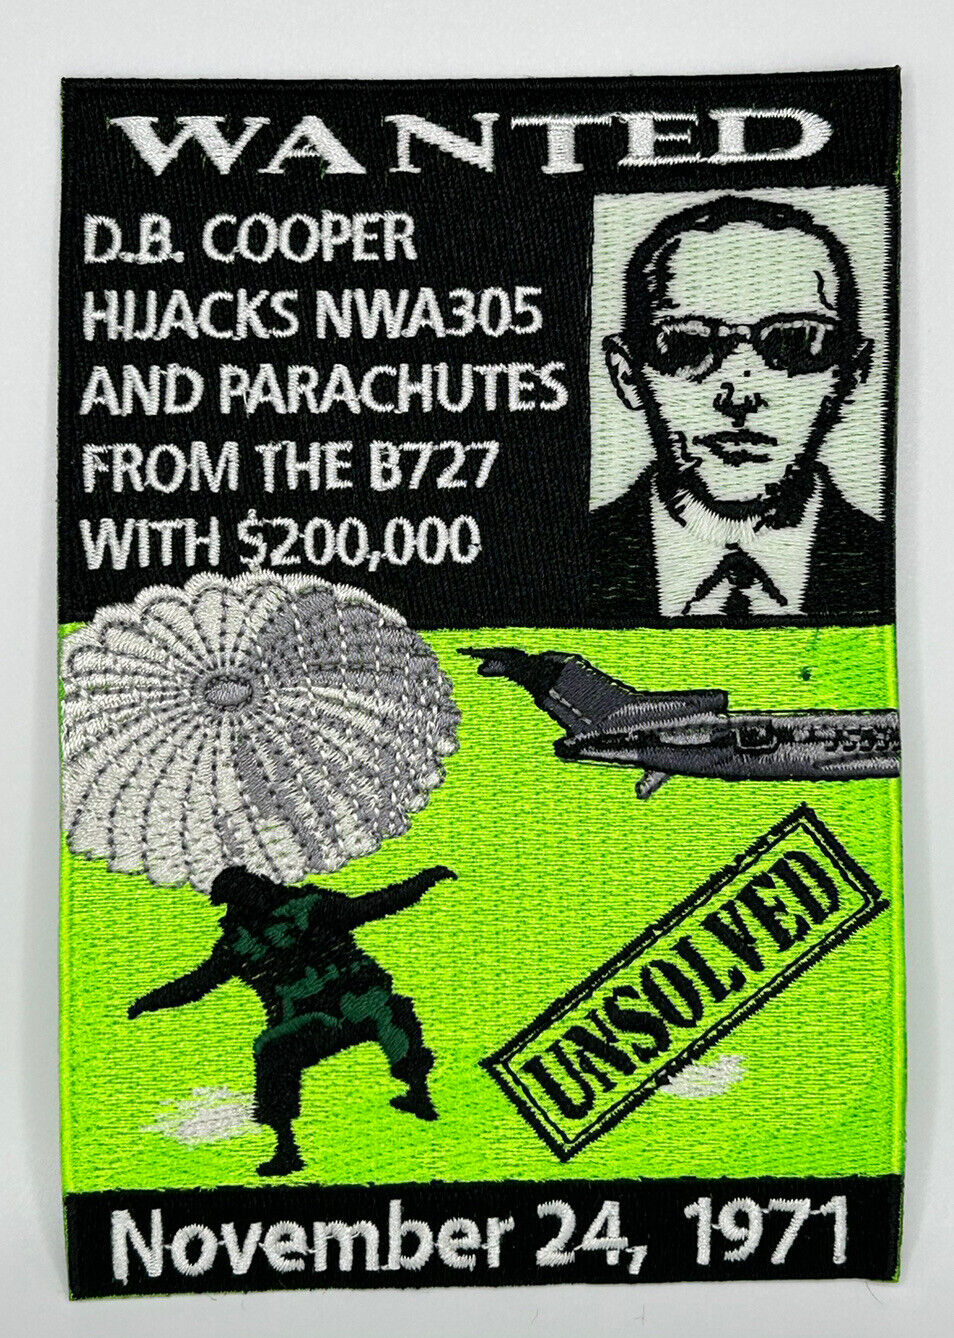 MR ALE Patches DB Cooper Hijack Northwest Airlines FBI LARGE GMAN Patch P162